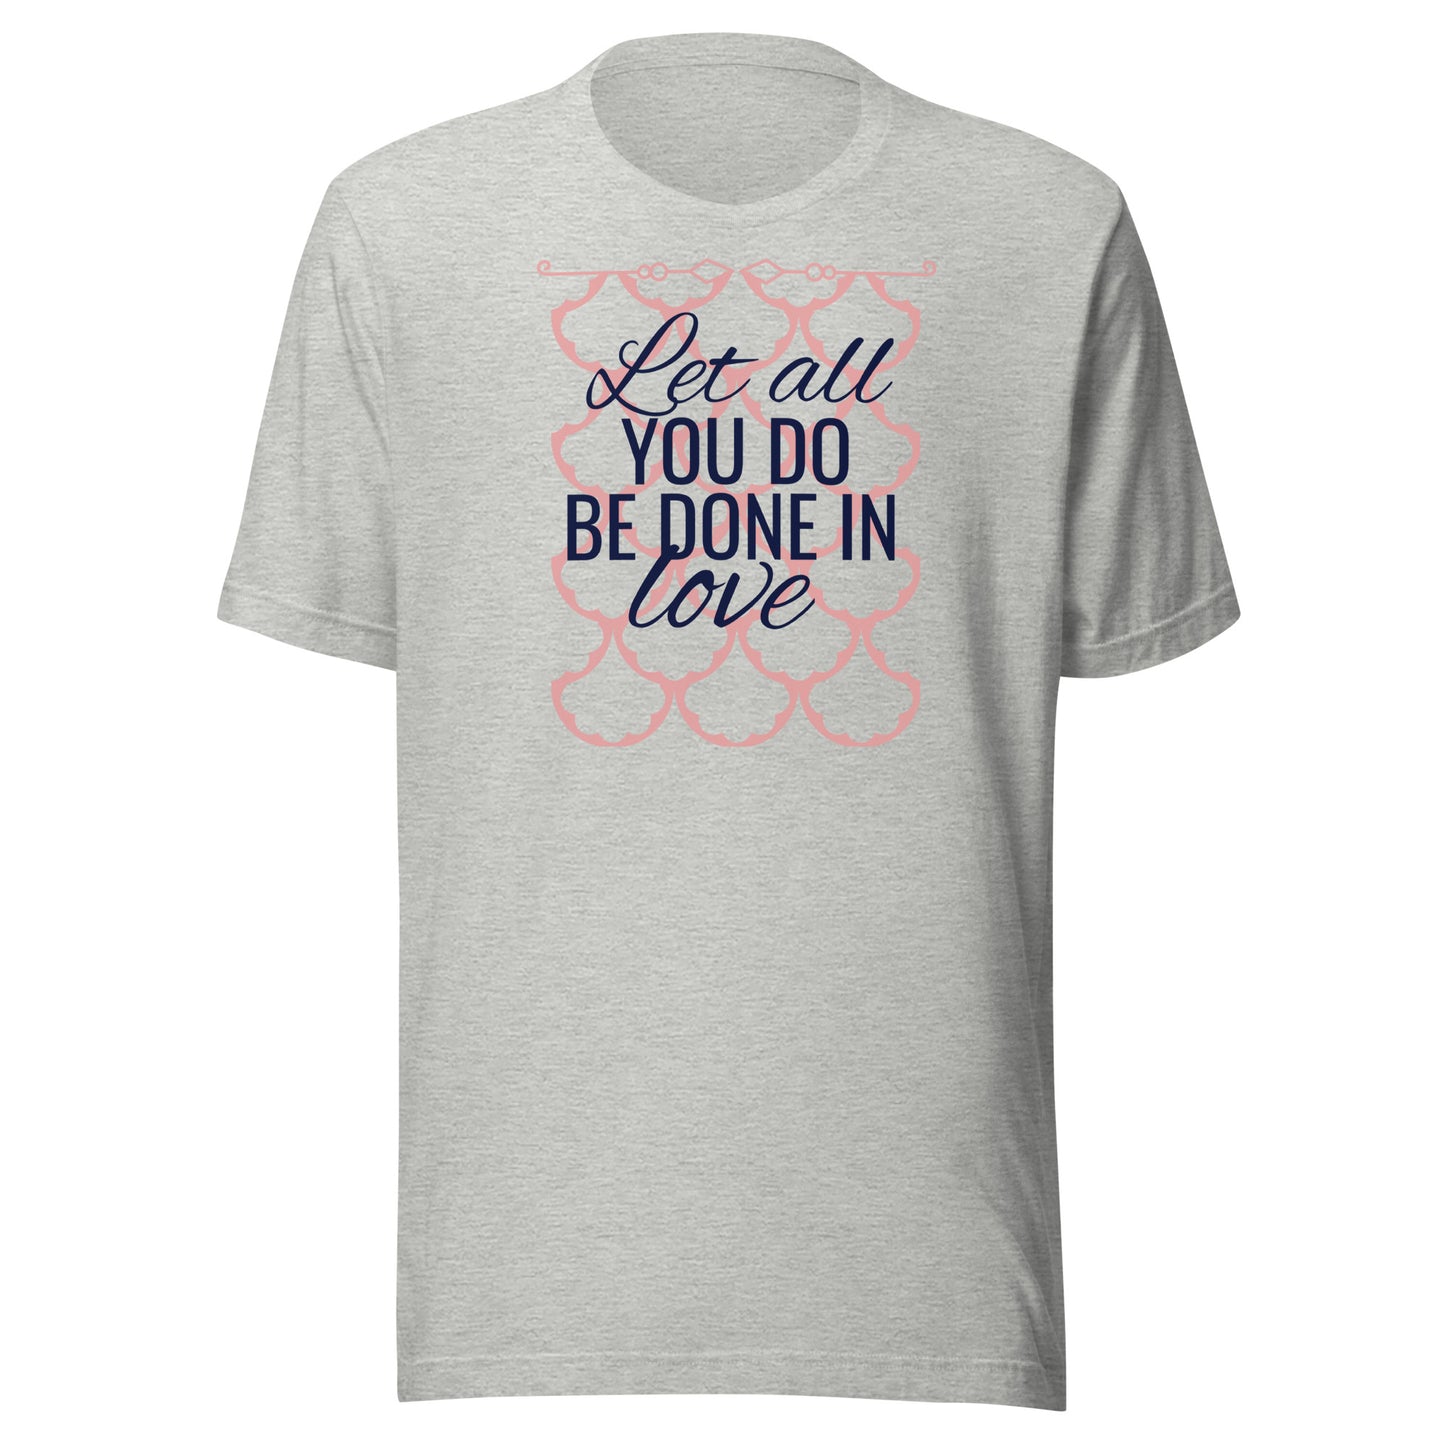 Let all you do be done in love. T-Shirt